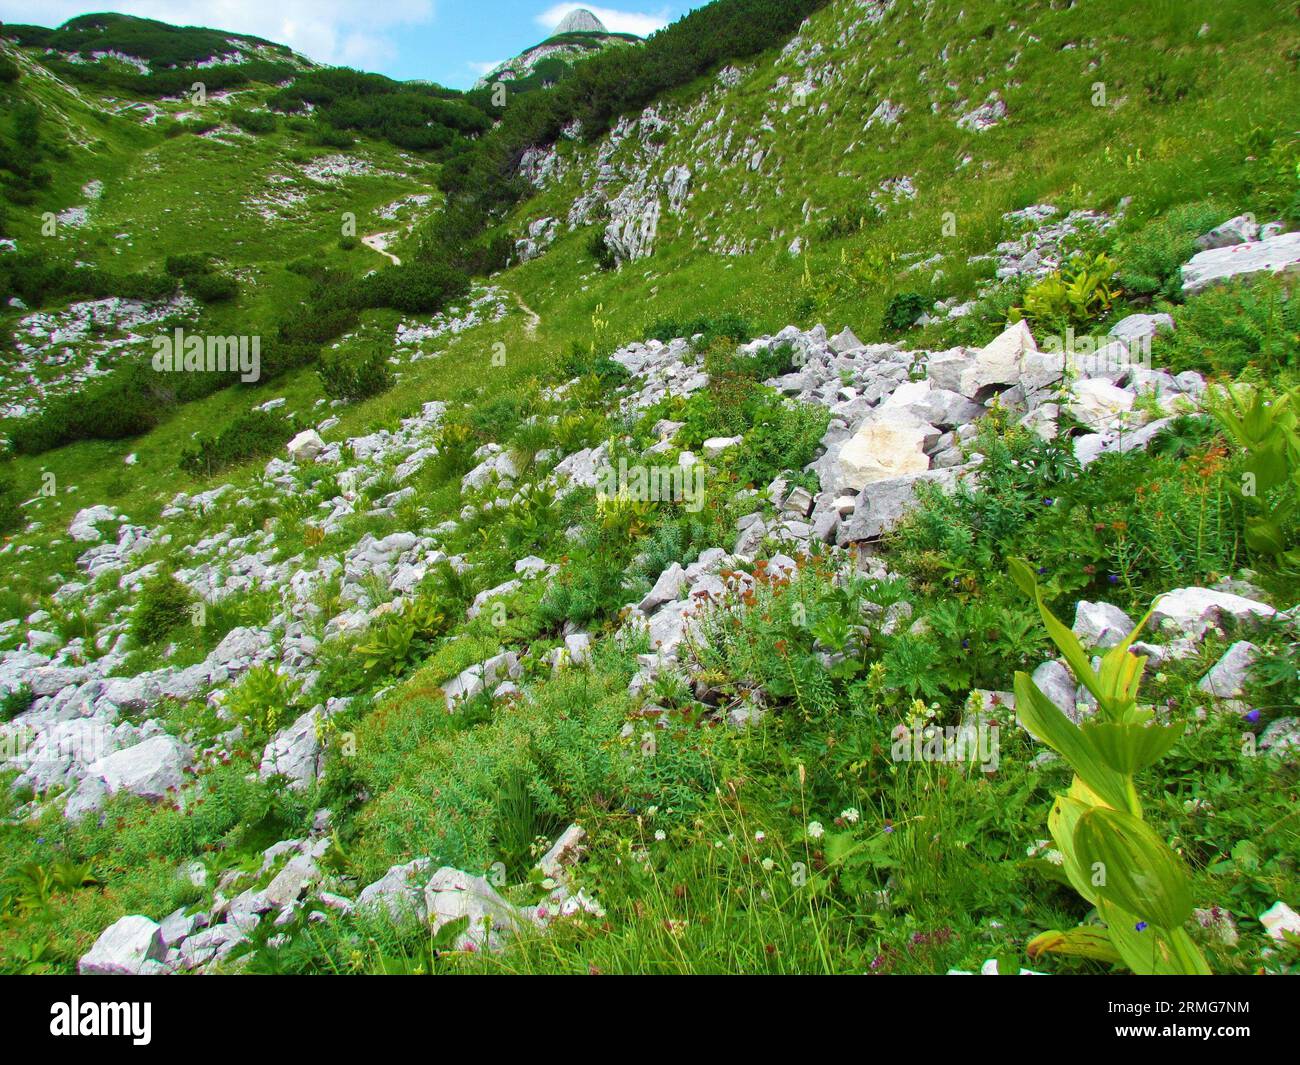 Alpine landscape with wildflowers incl golden root, rose root, aaron's rod, arctic root, king's crown, lignum rhodium, orpin rose (Rhodiola rosea) and Stock Photo